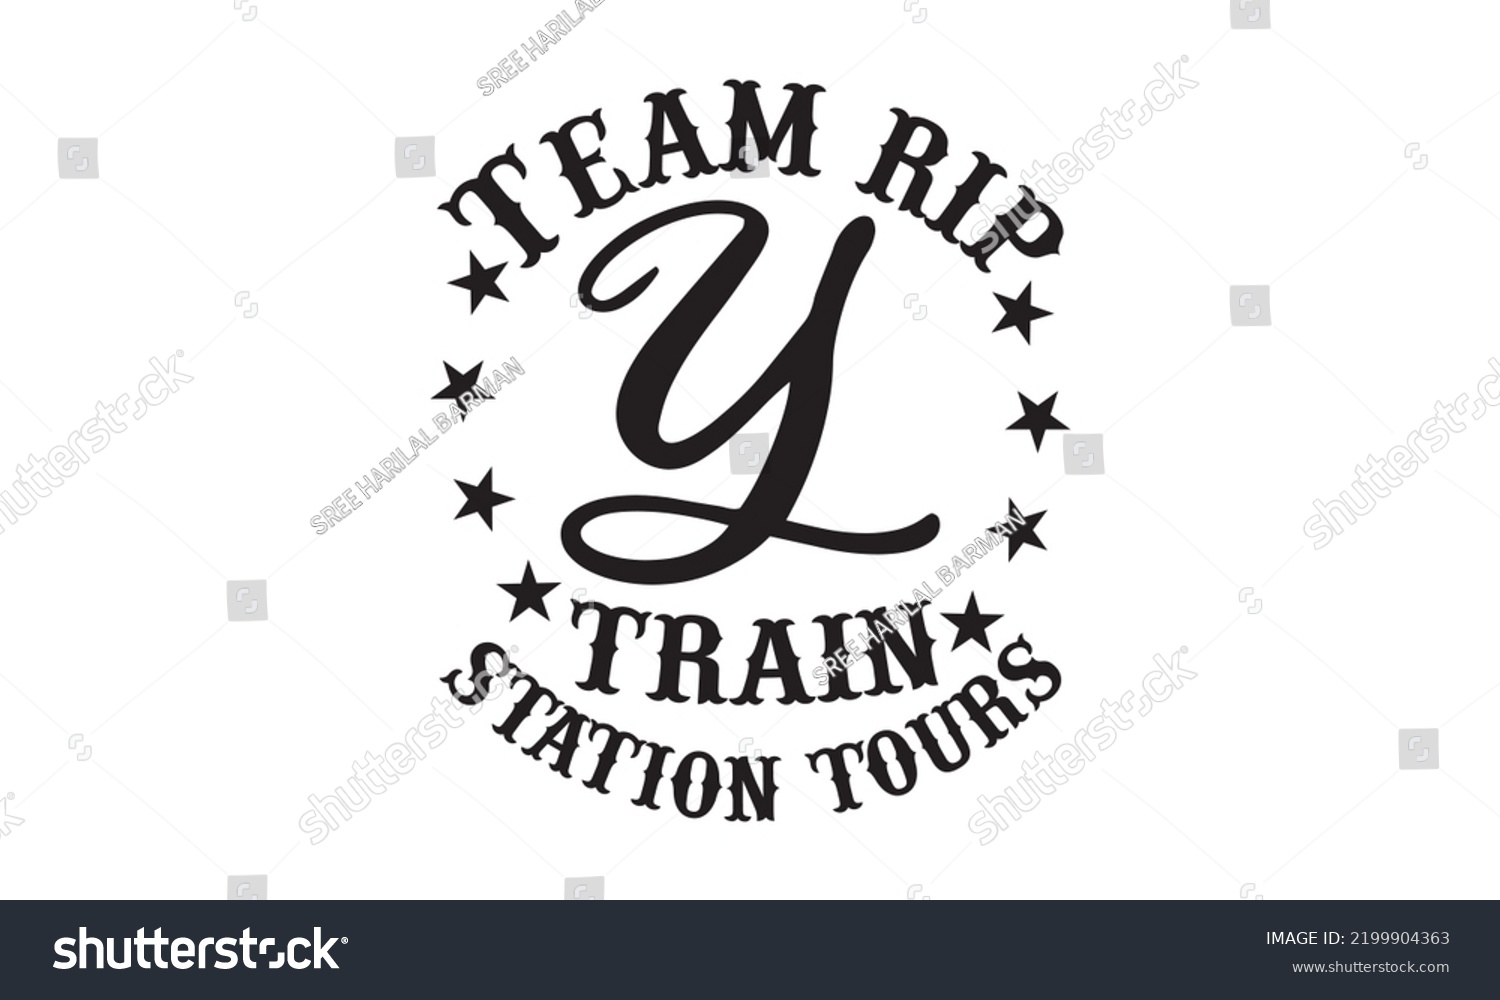 SVG of Team rip y train station tours - Train SVG t-shirt design, Hand drew lettering phrases, templet, Calligraphy graphic design, SVG Files for Cutting Cricut and Silhouette. Eps 10 svg